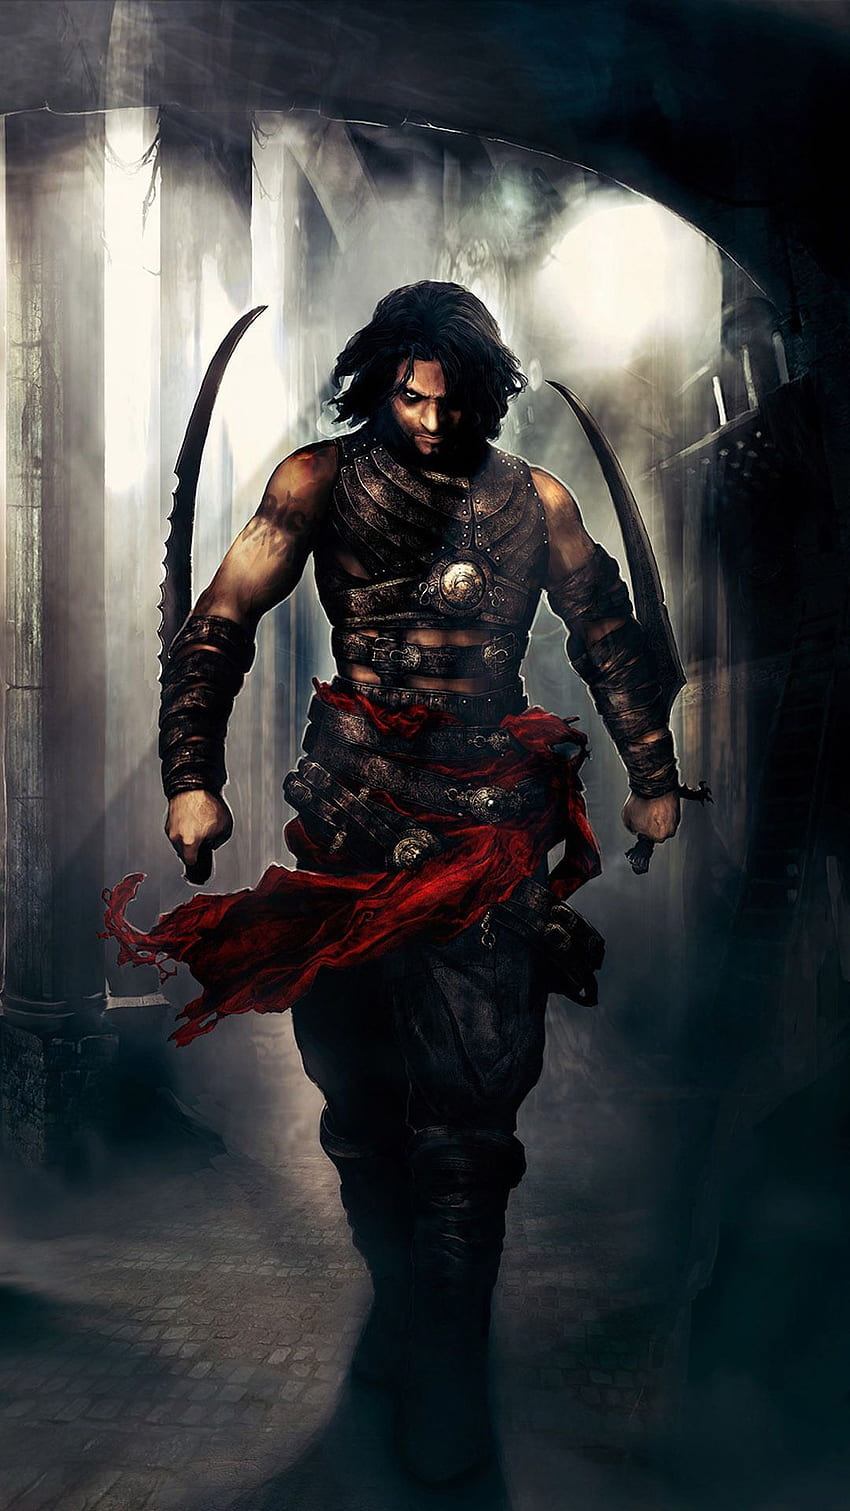 iphone for Prince of Persia. Prince of persia, Persian warrior, Persia, Prince of Persia 3 HD phone wallpaper